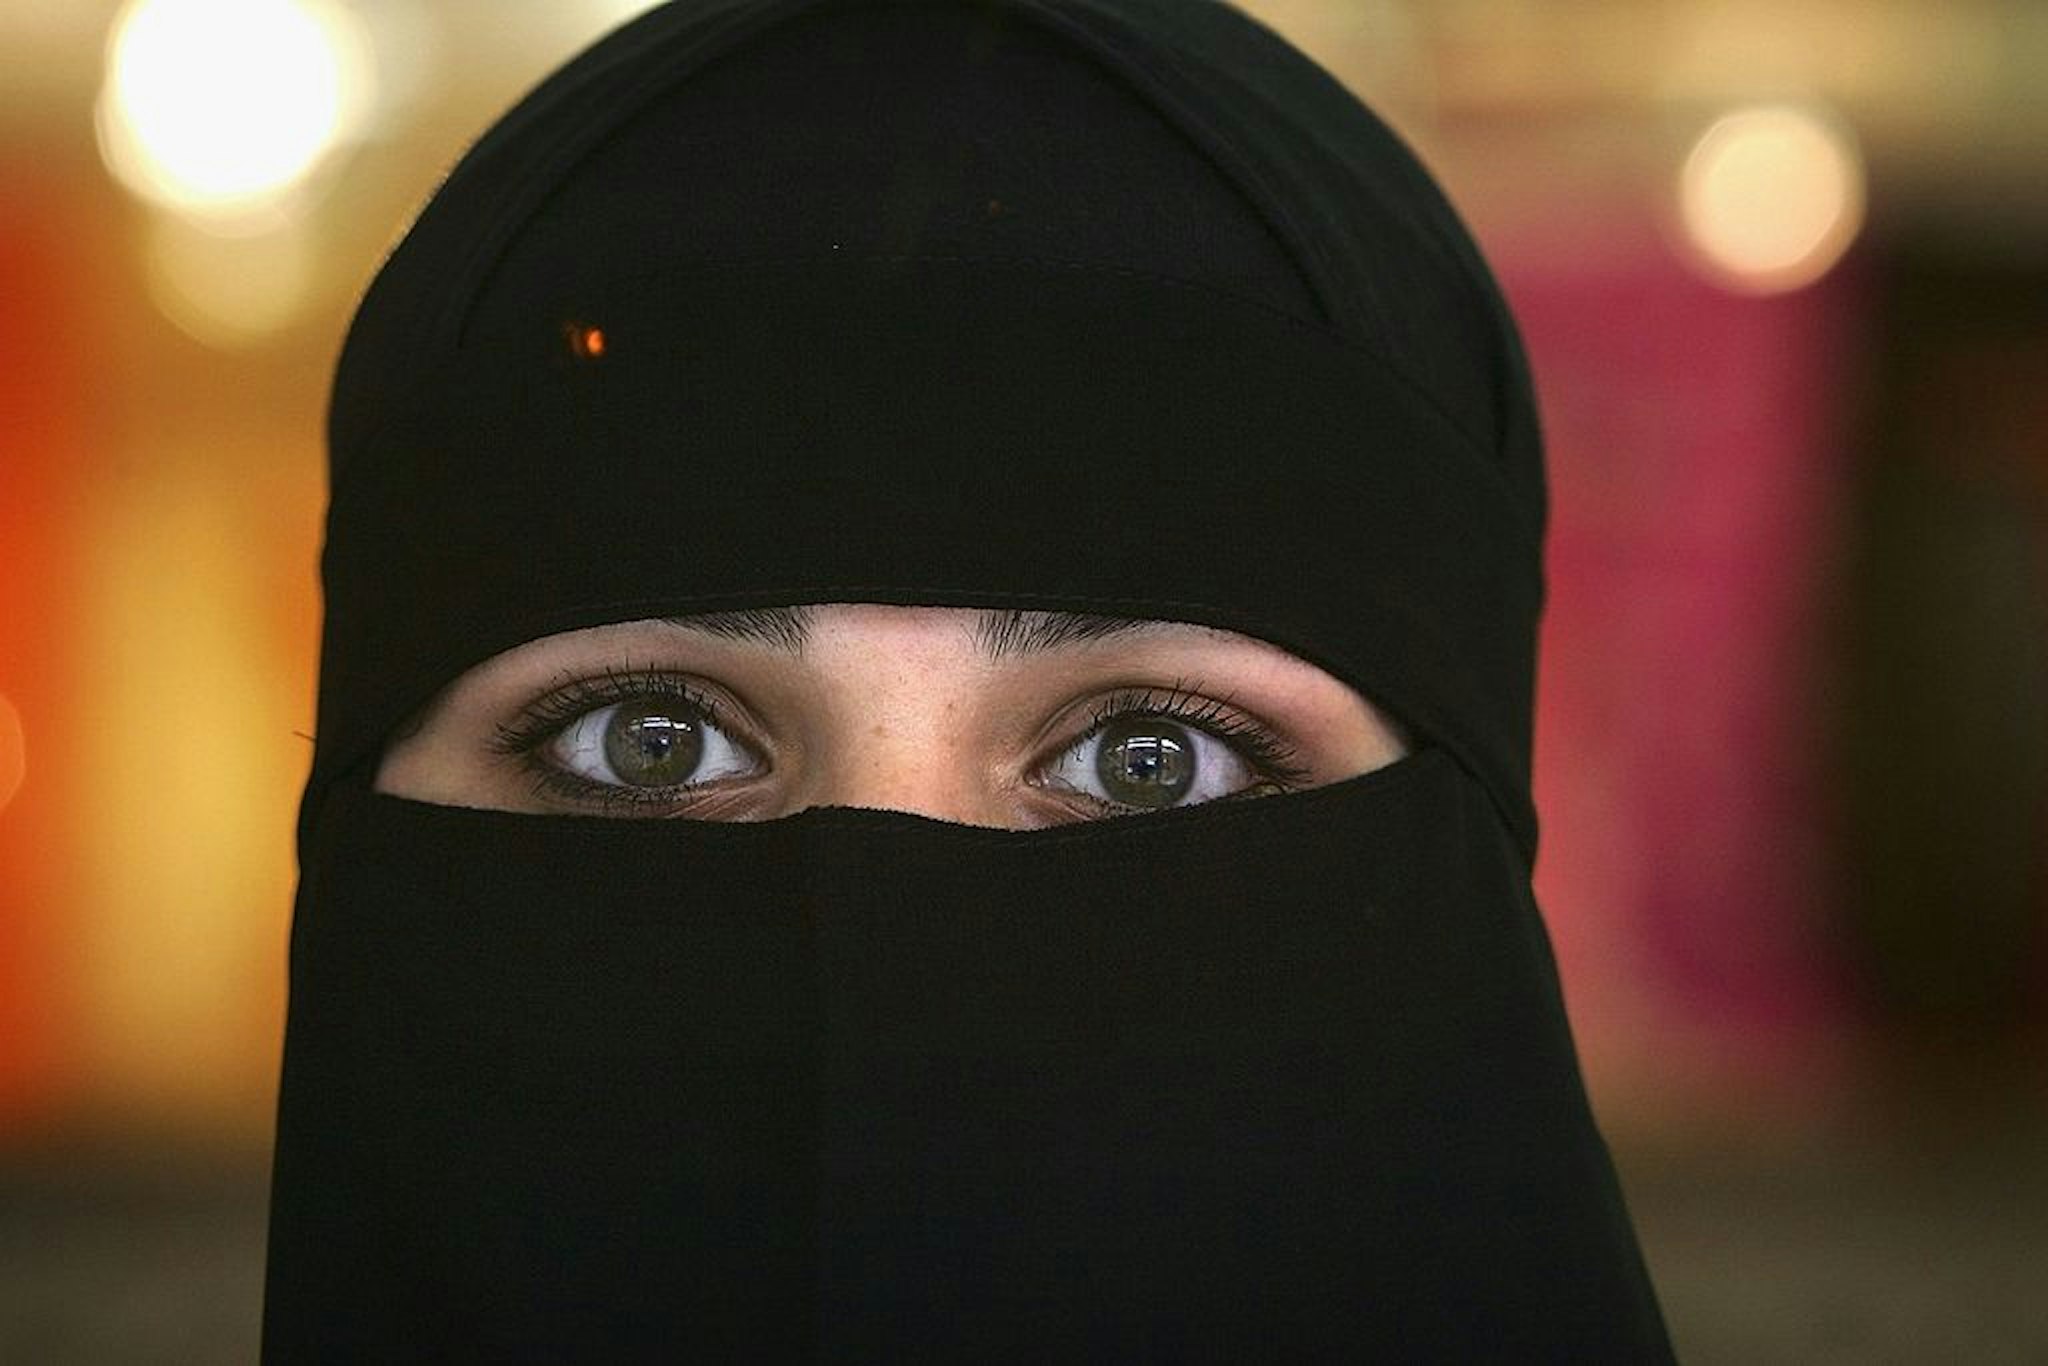 BLACKBURN, UNITED KINGDOM - OCTOBER 06: A Muslim woman wearing a Niqab poses inside an Asian fashion shop in the British northern town of Blackburn, the constituency of Member of Parliament Jack Straw, where a quarter of his constituents are Muslim on October 6, 2006, Blackburn, England. Leader of the House of Commons Jack Straw has said that he asked Muslim women attending his Blackburn constituency surgeries if they would mind removing veils. The comments have caused anger within the Muslim community.